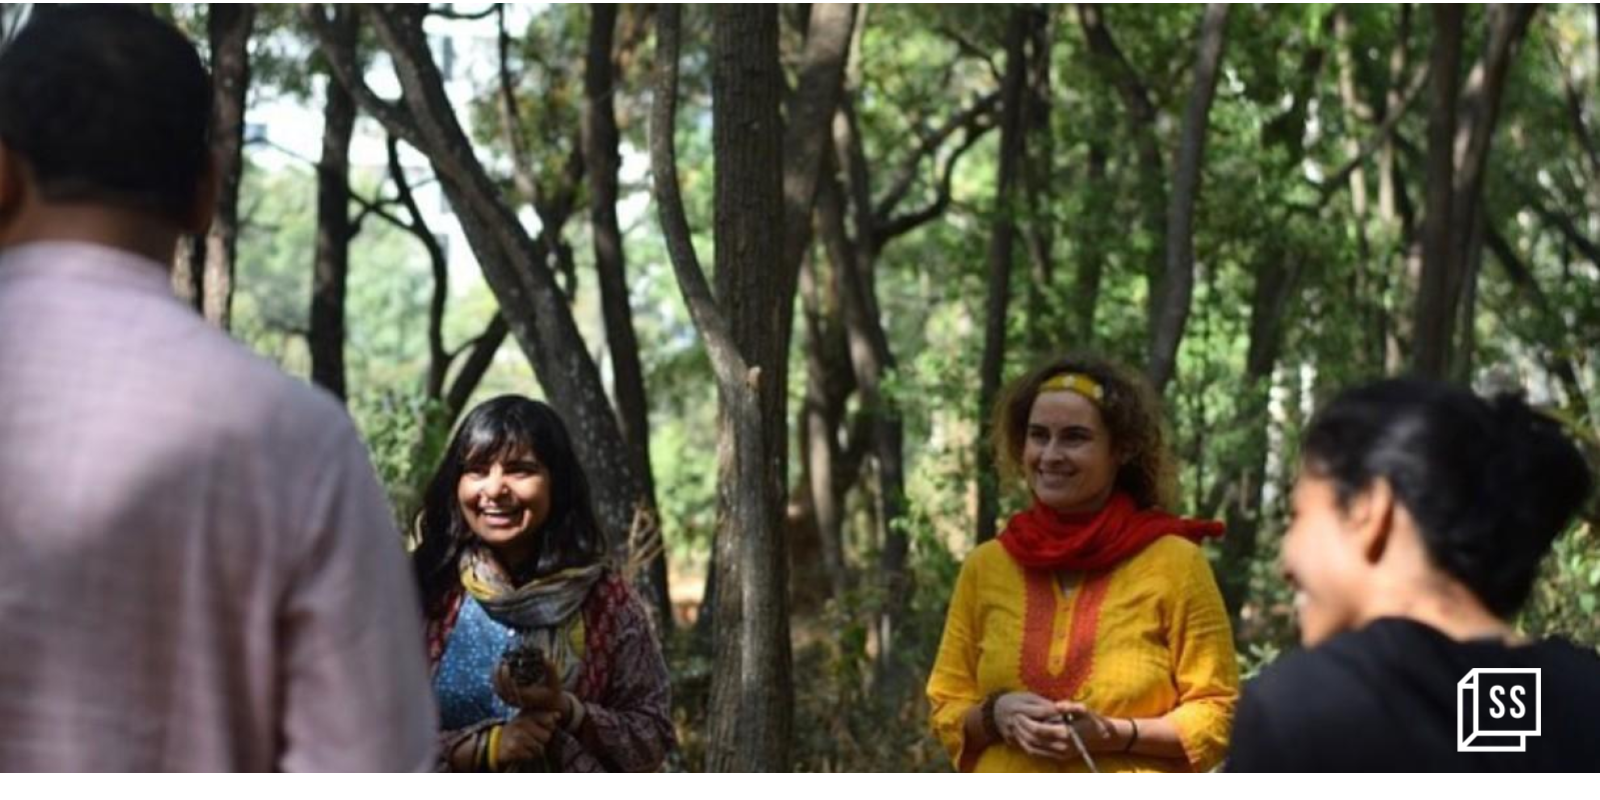 Urban dwellers turn to nature to find inner peace, reconnect with themselves
